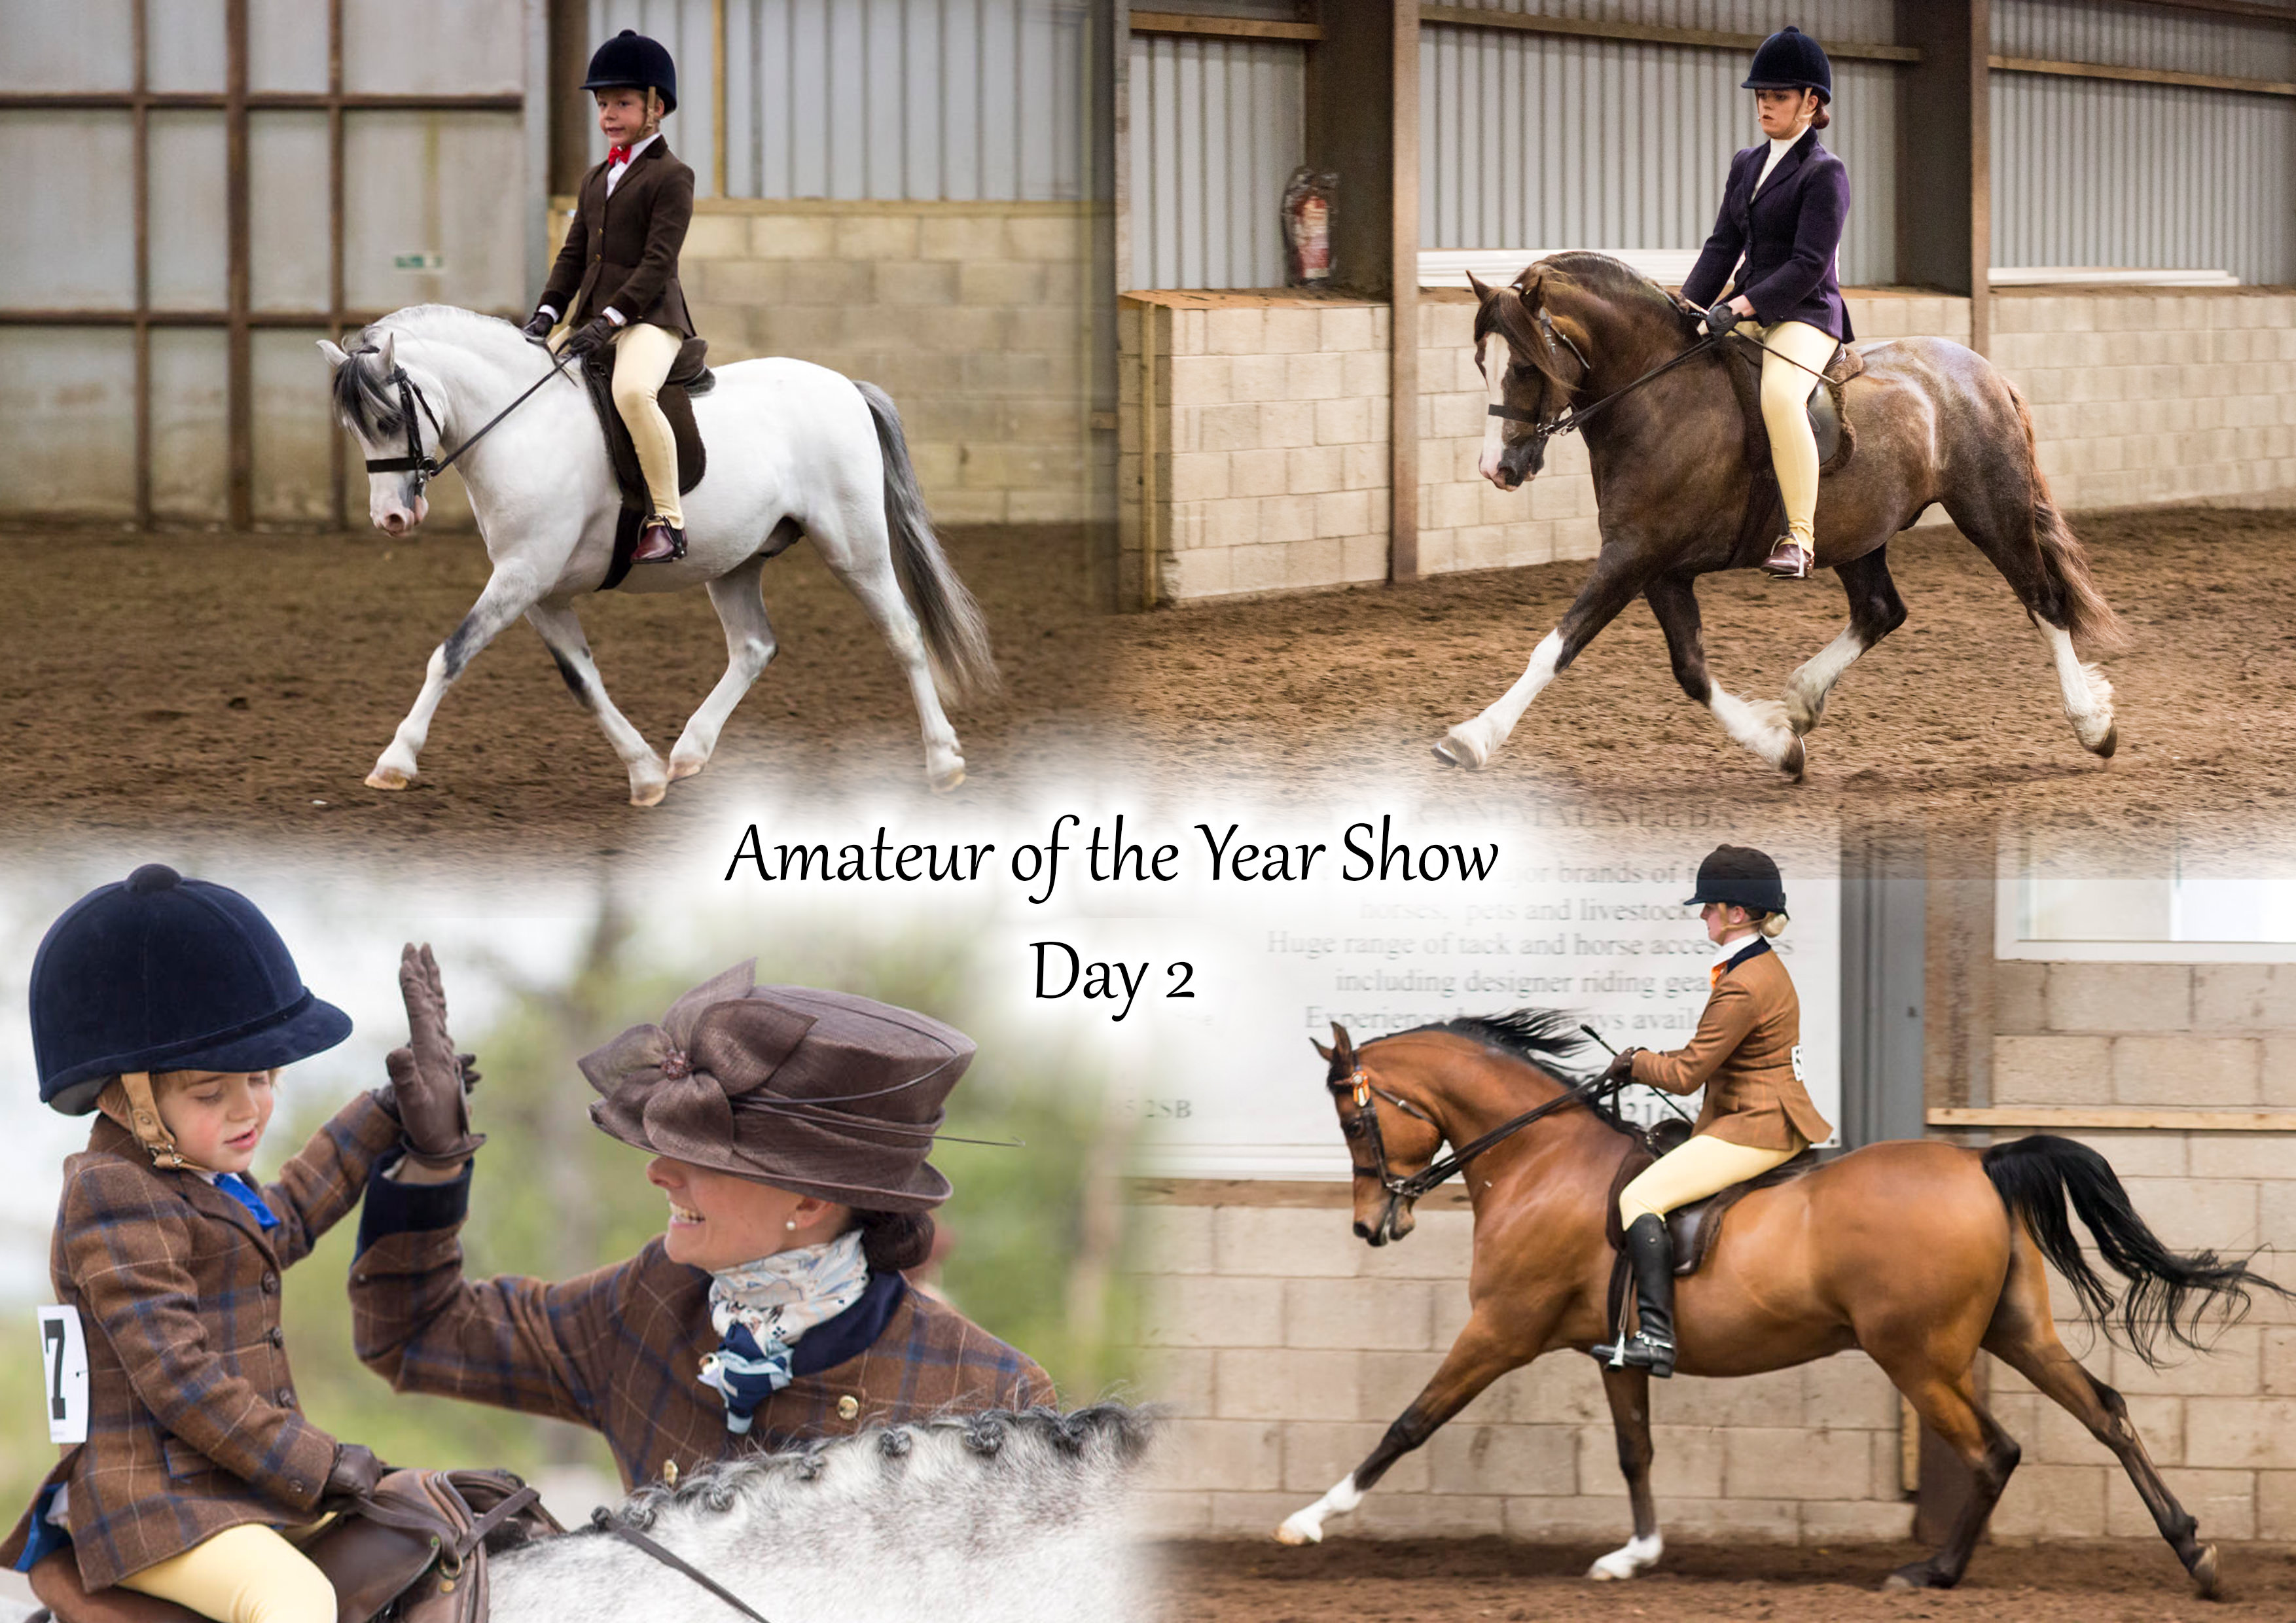 Amateur of the Year Show- Day 2